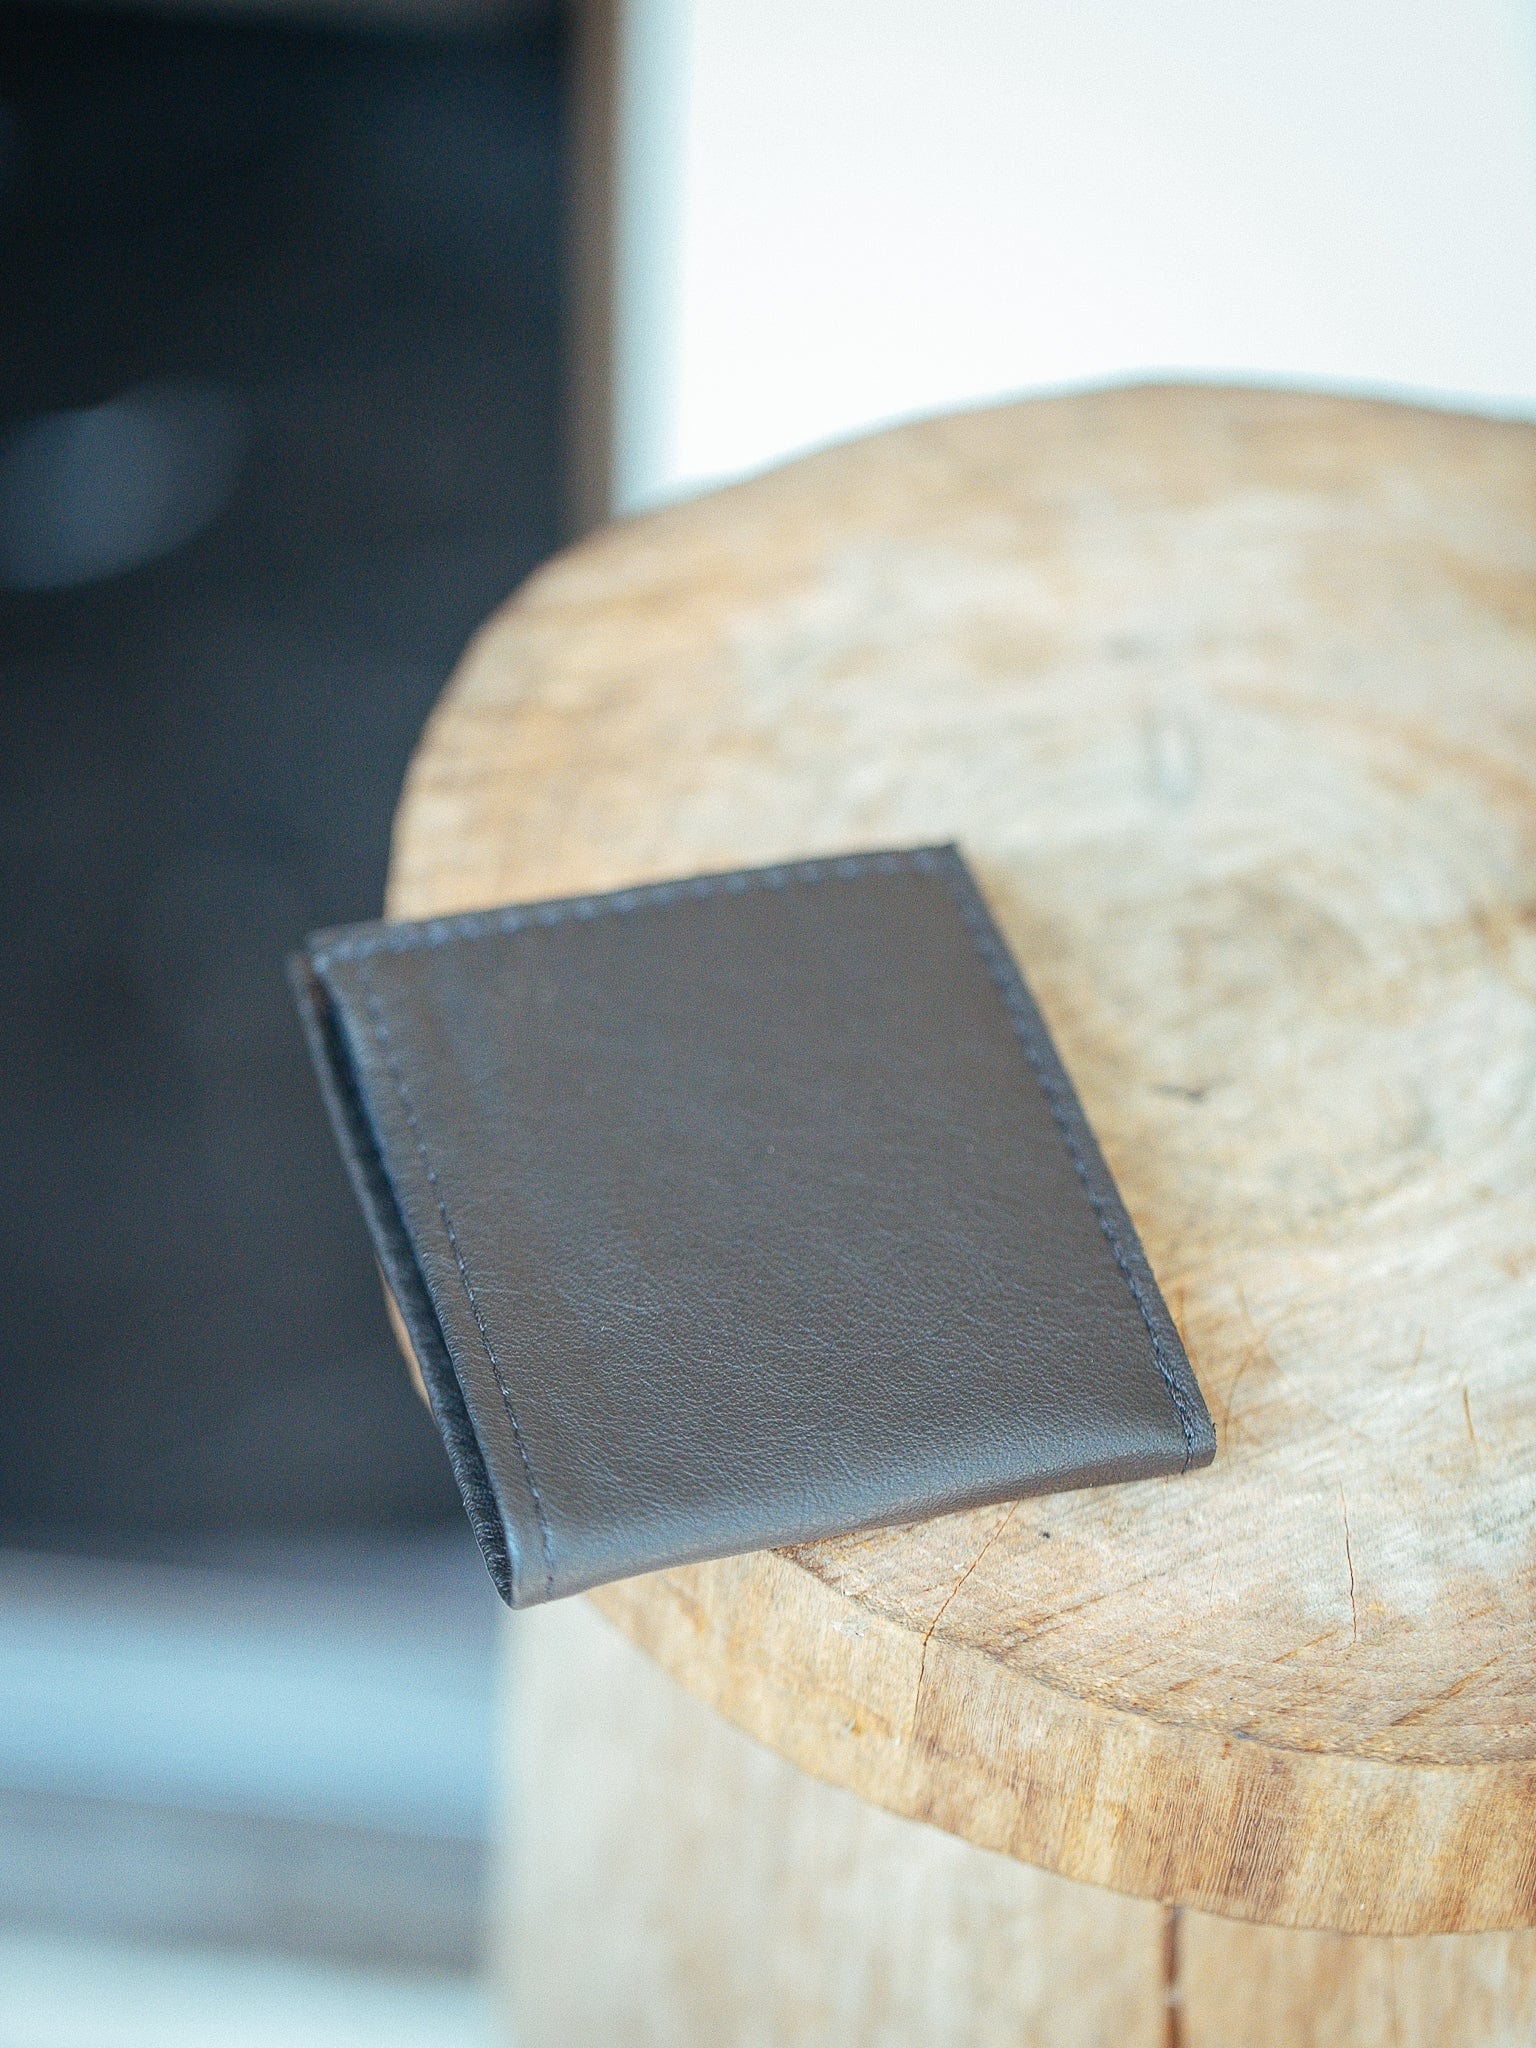 The Real McCaul Leathergoods Wallet Black Small Bifold Wallet with Window - Cowhide Australian Made Australian Owned Australian Made Small Bi-Fold Leather Wallet with Window - Cowhide